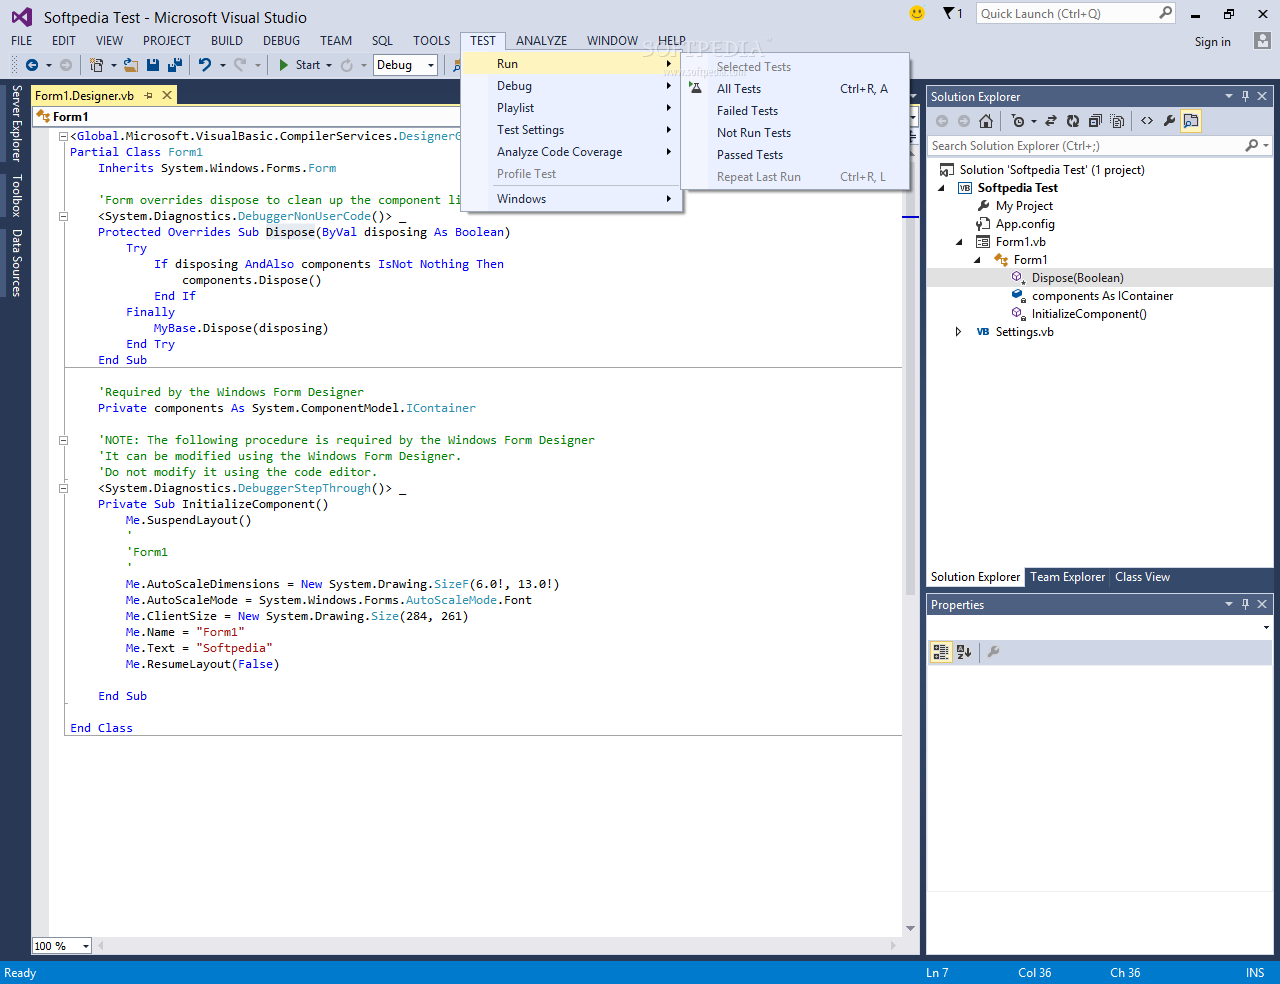 download visual studio professional 2015 with update 3